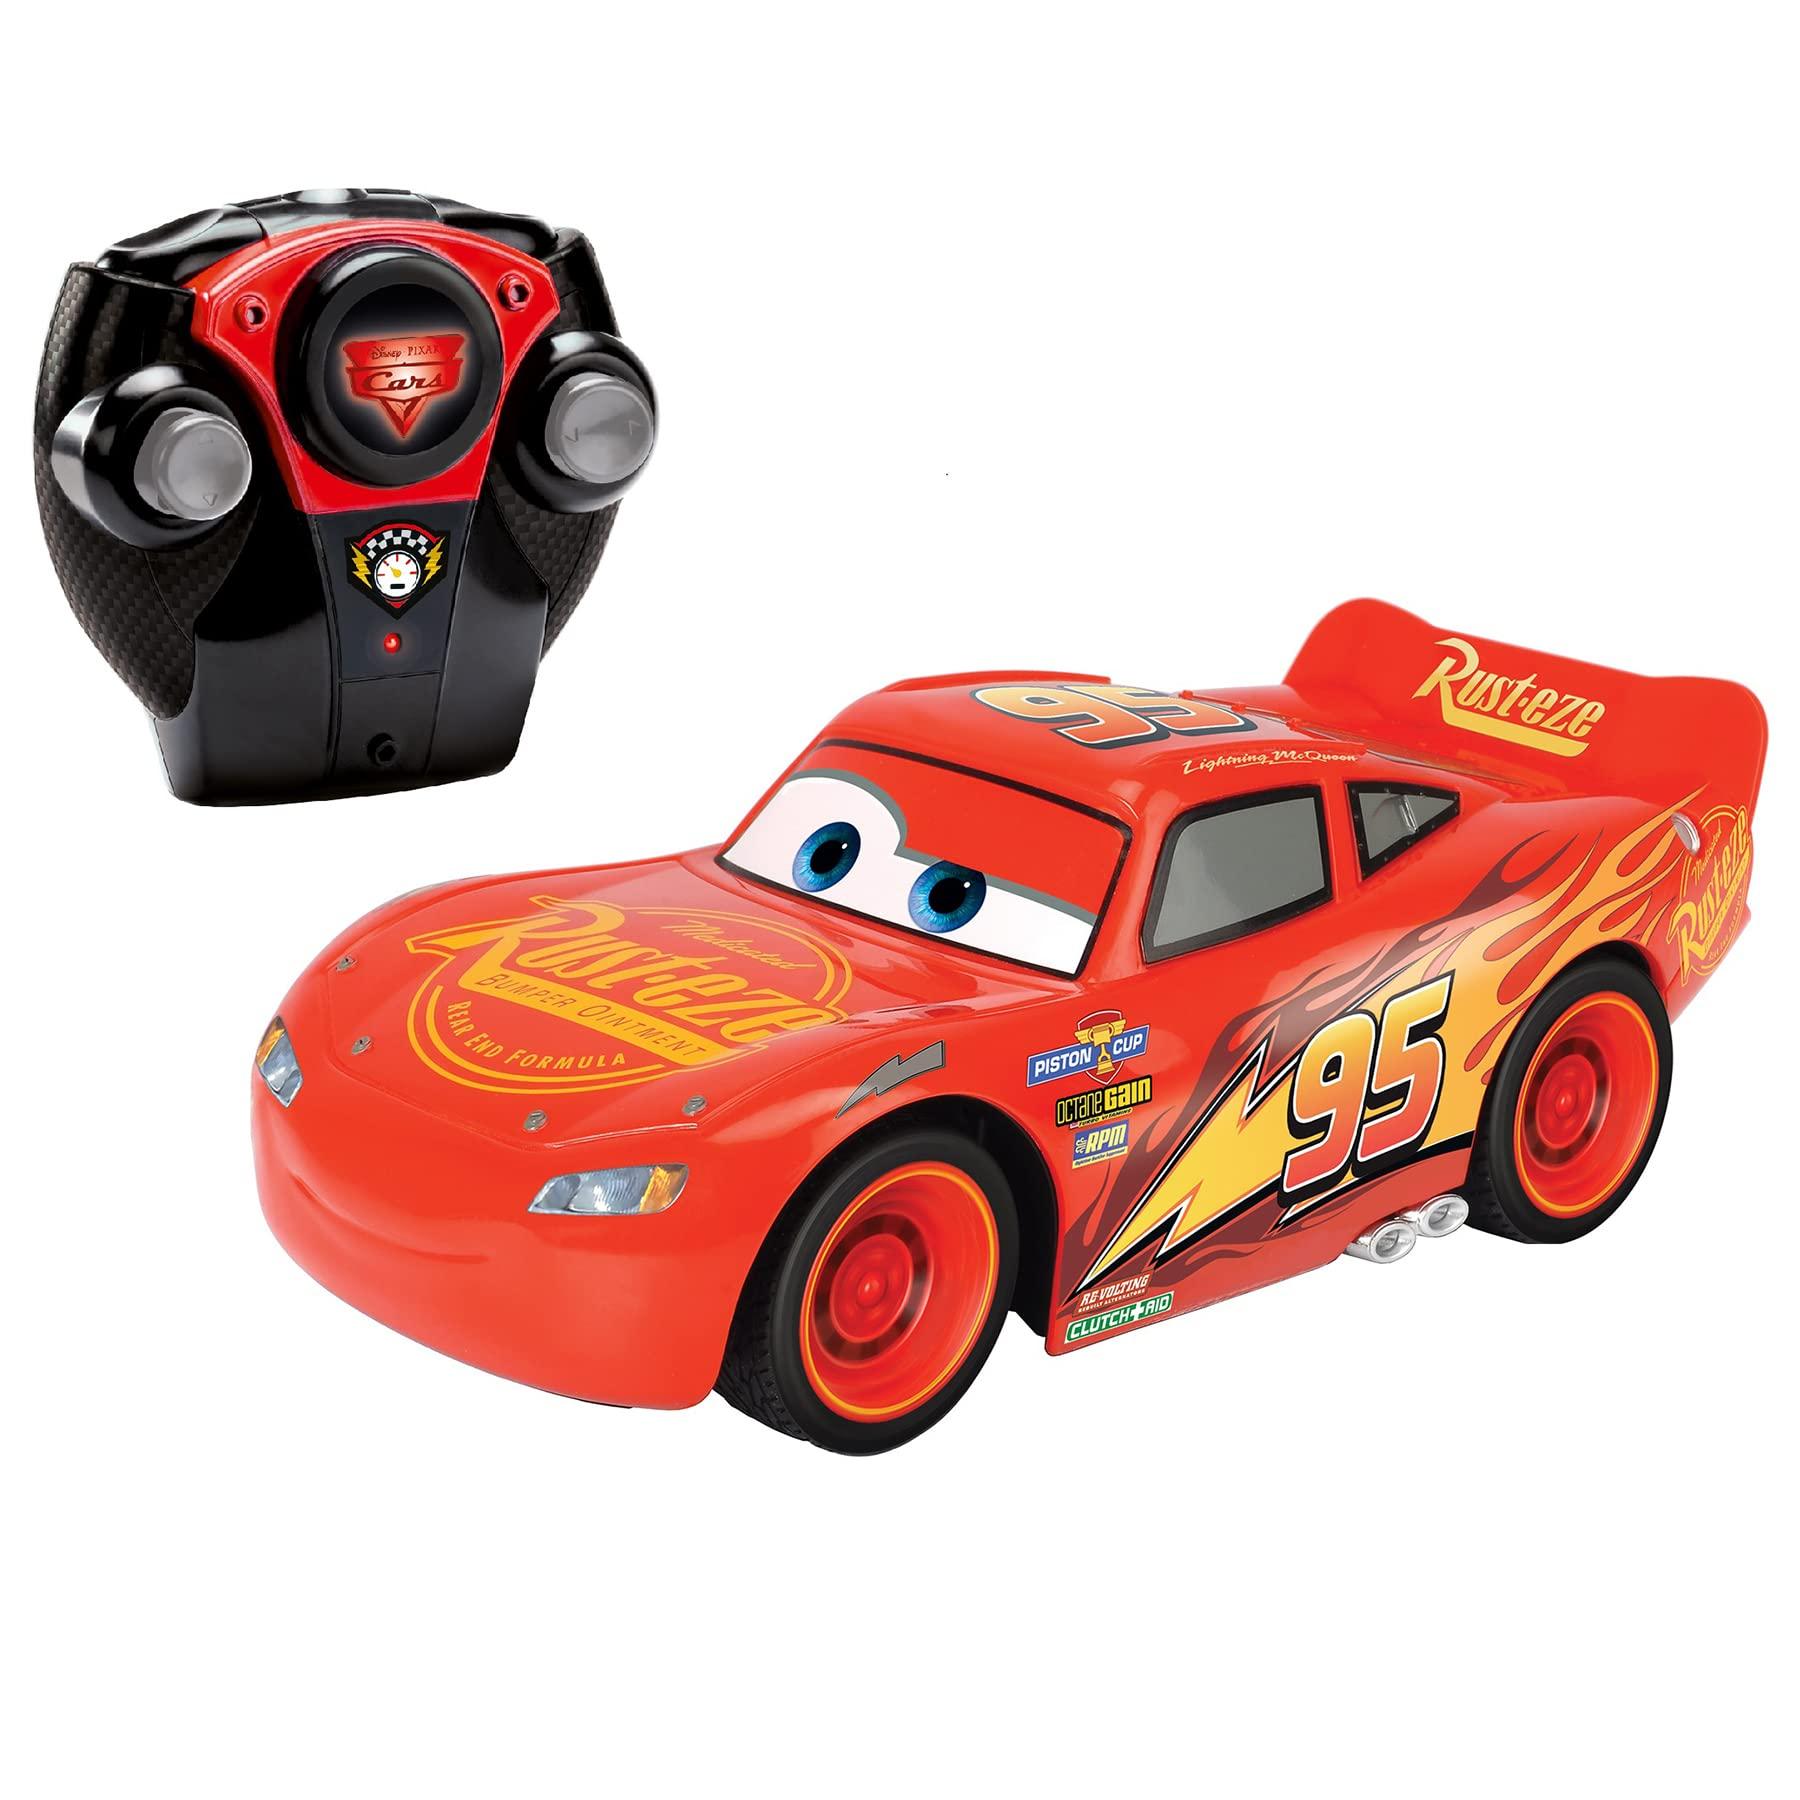 Lightning Mcqueen Rc Car: The Long-Lasting and Durable Lightning McQueen RC Car: A Must-Have Toy for Kids